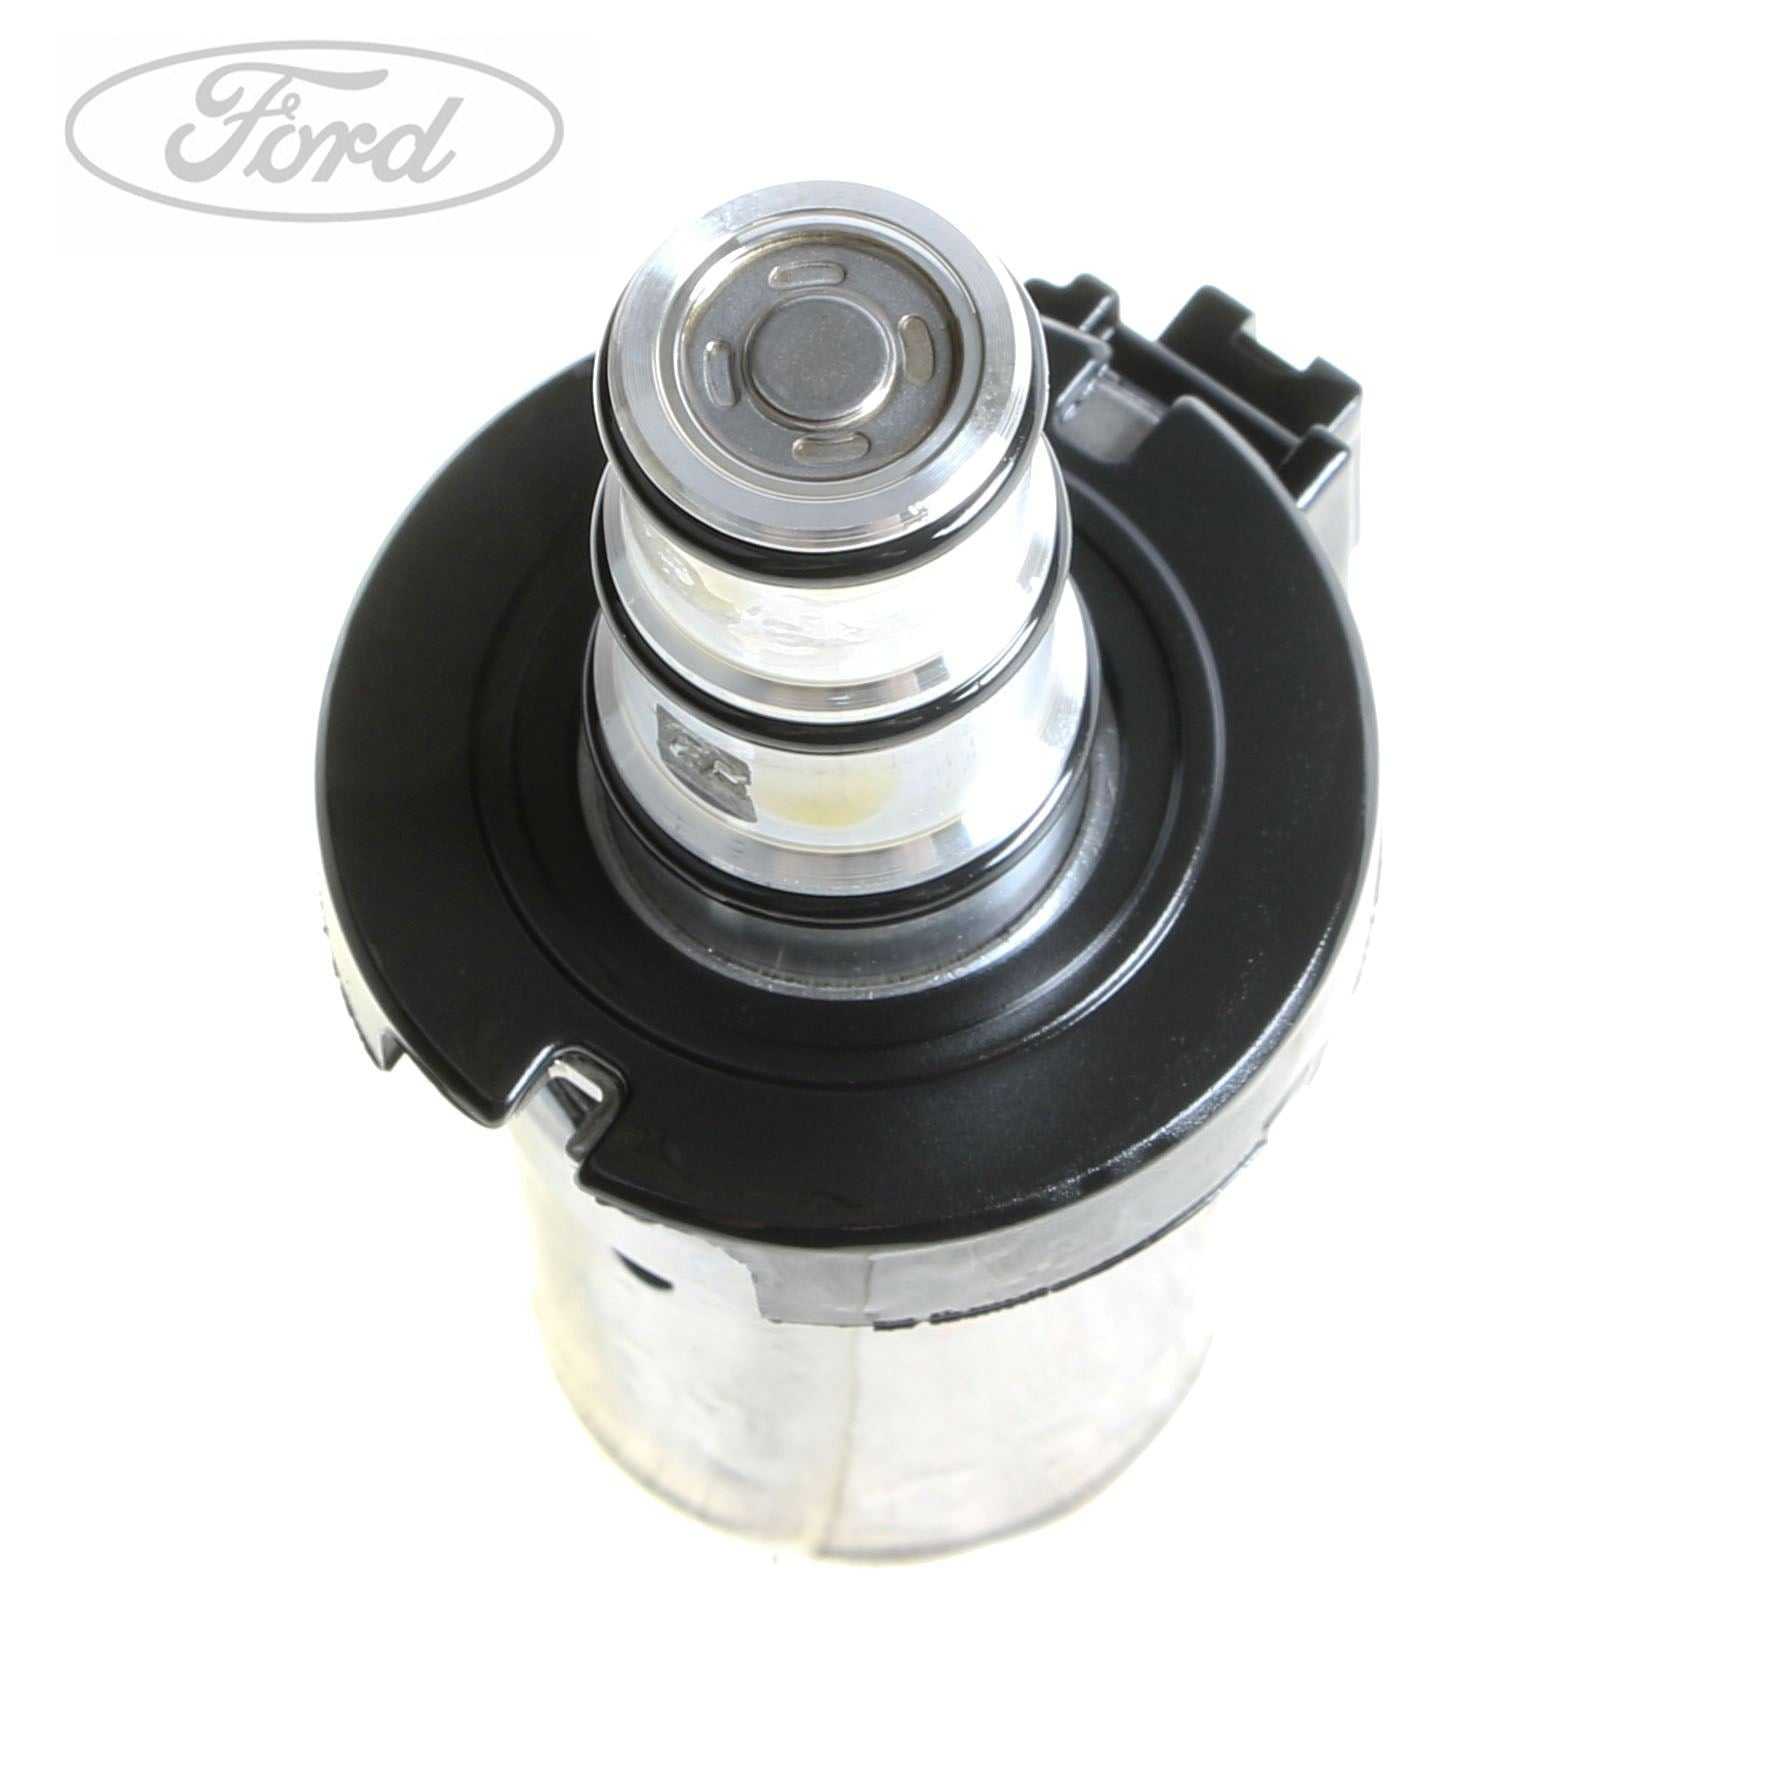 Ford, TRANSMISSION CONTROL SOLENOID